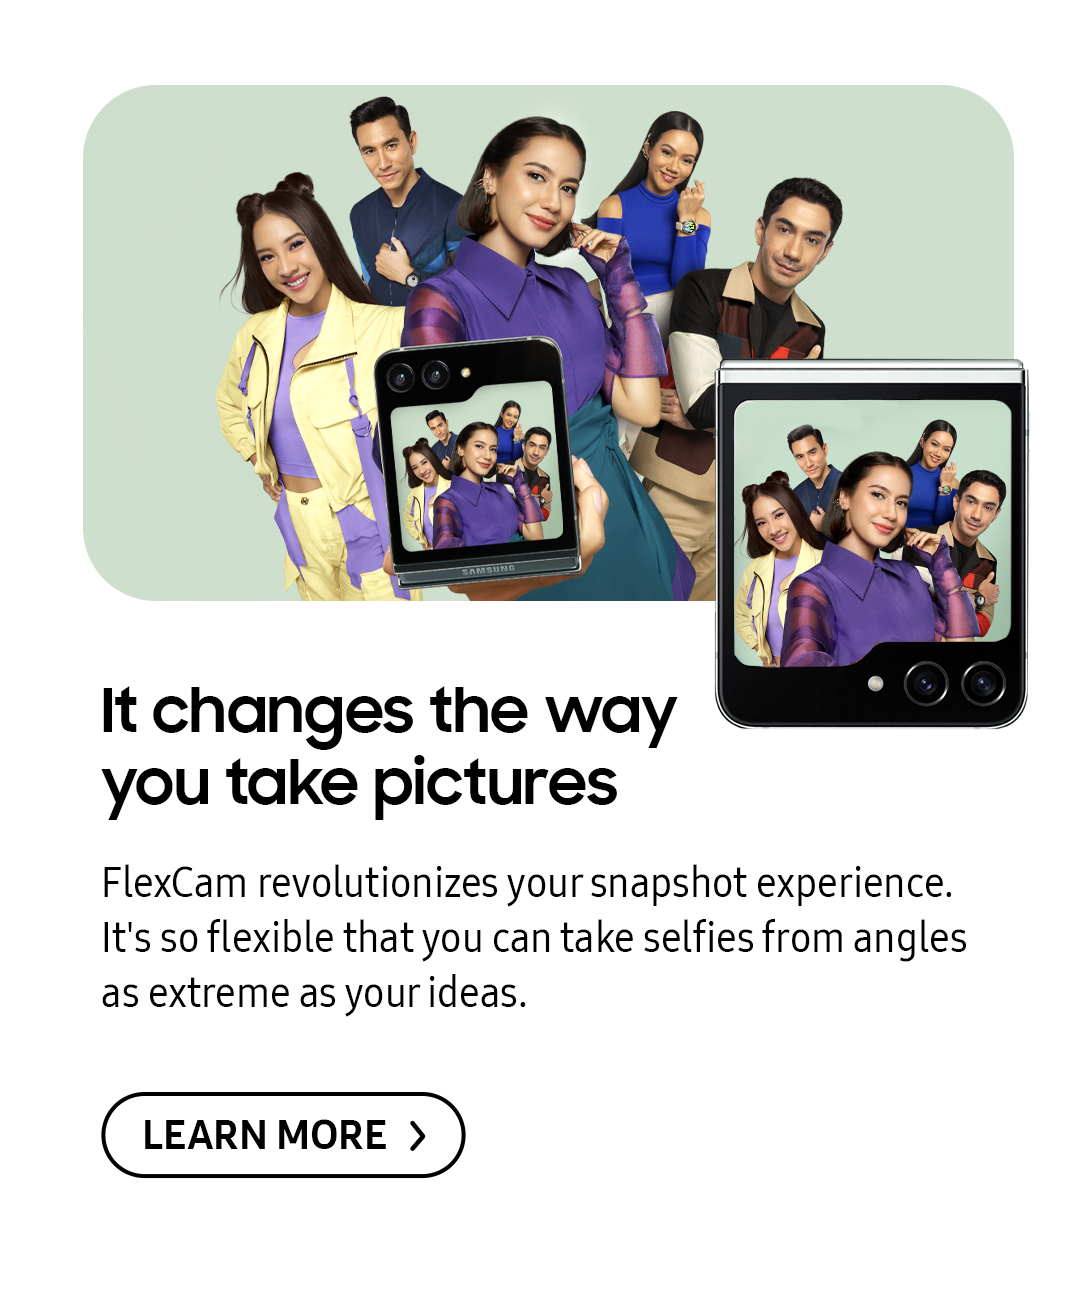 It changes the way you take pictures | FlexCam revolutionizes your snapshot experience. It's so flexible that you can take selfies from angles as extreme as your ideas. Click here to learn more!